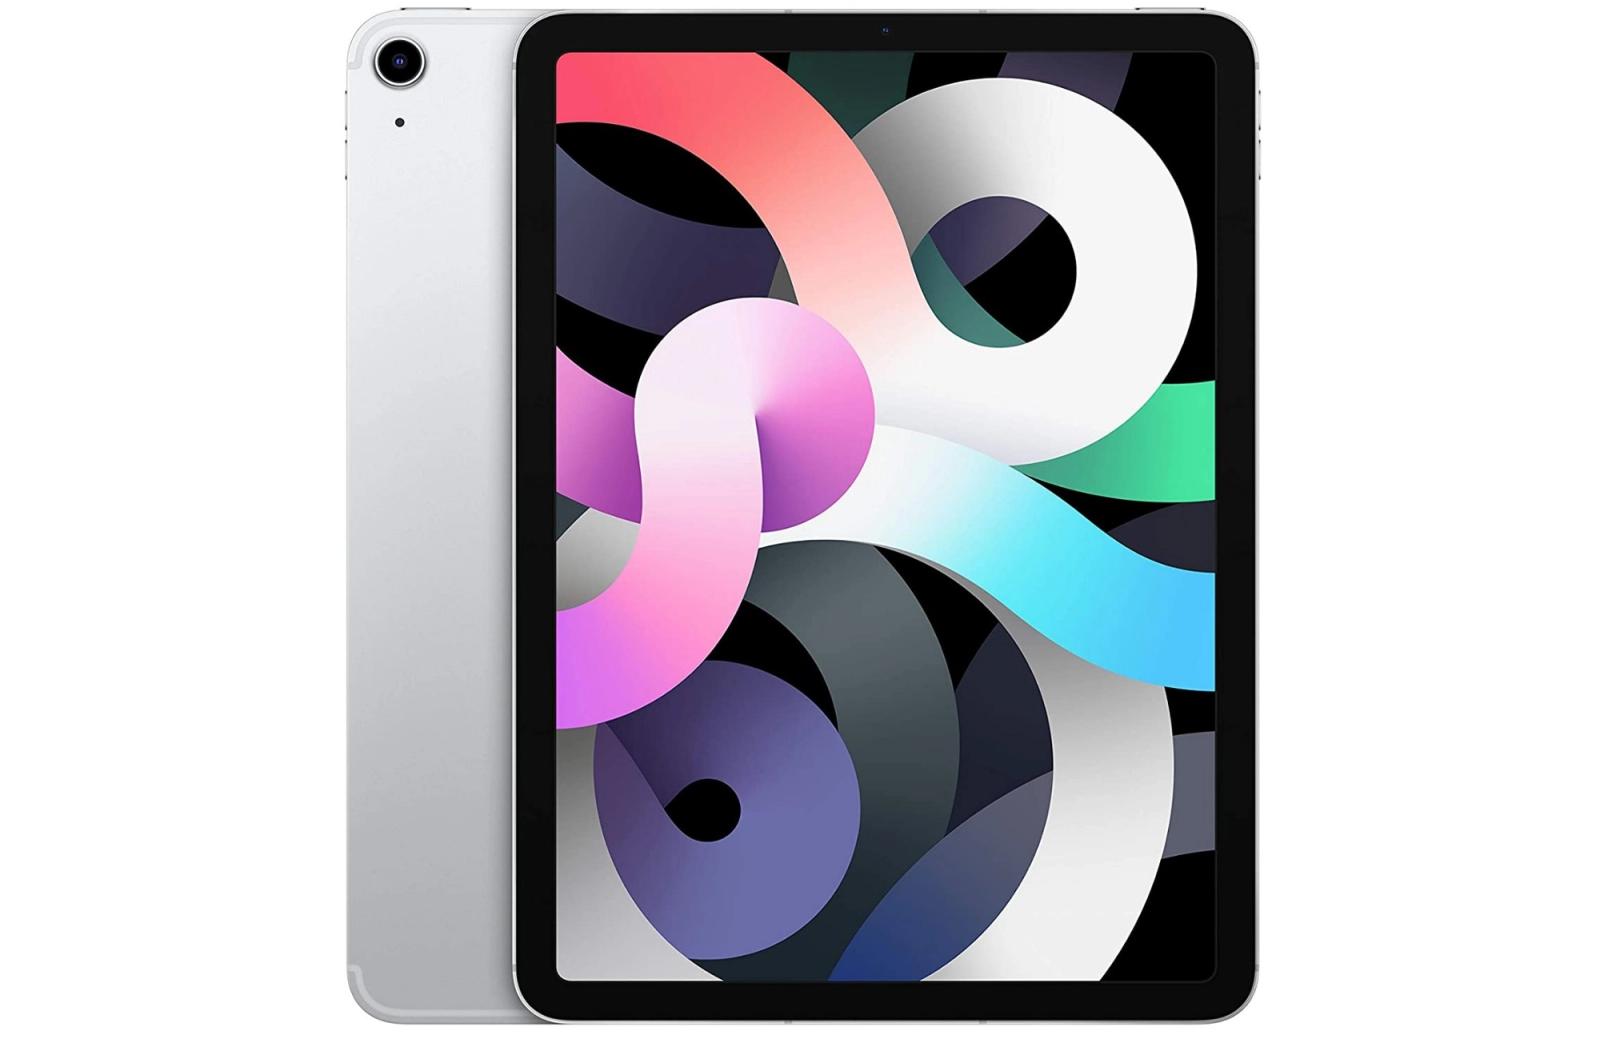 Best iPad 2021: Our Top Picks For November